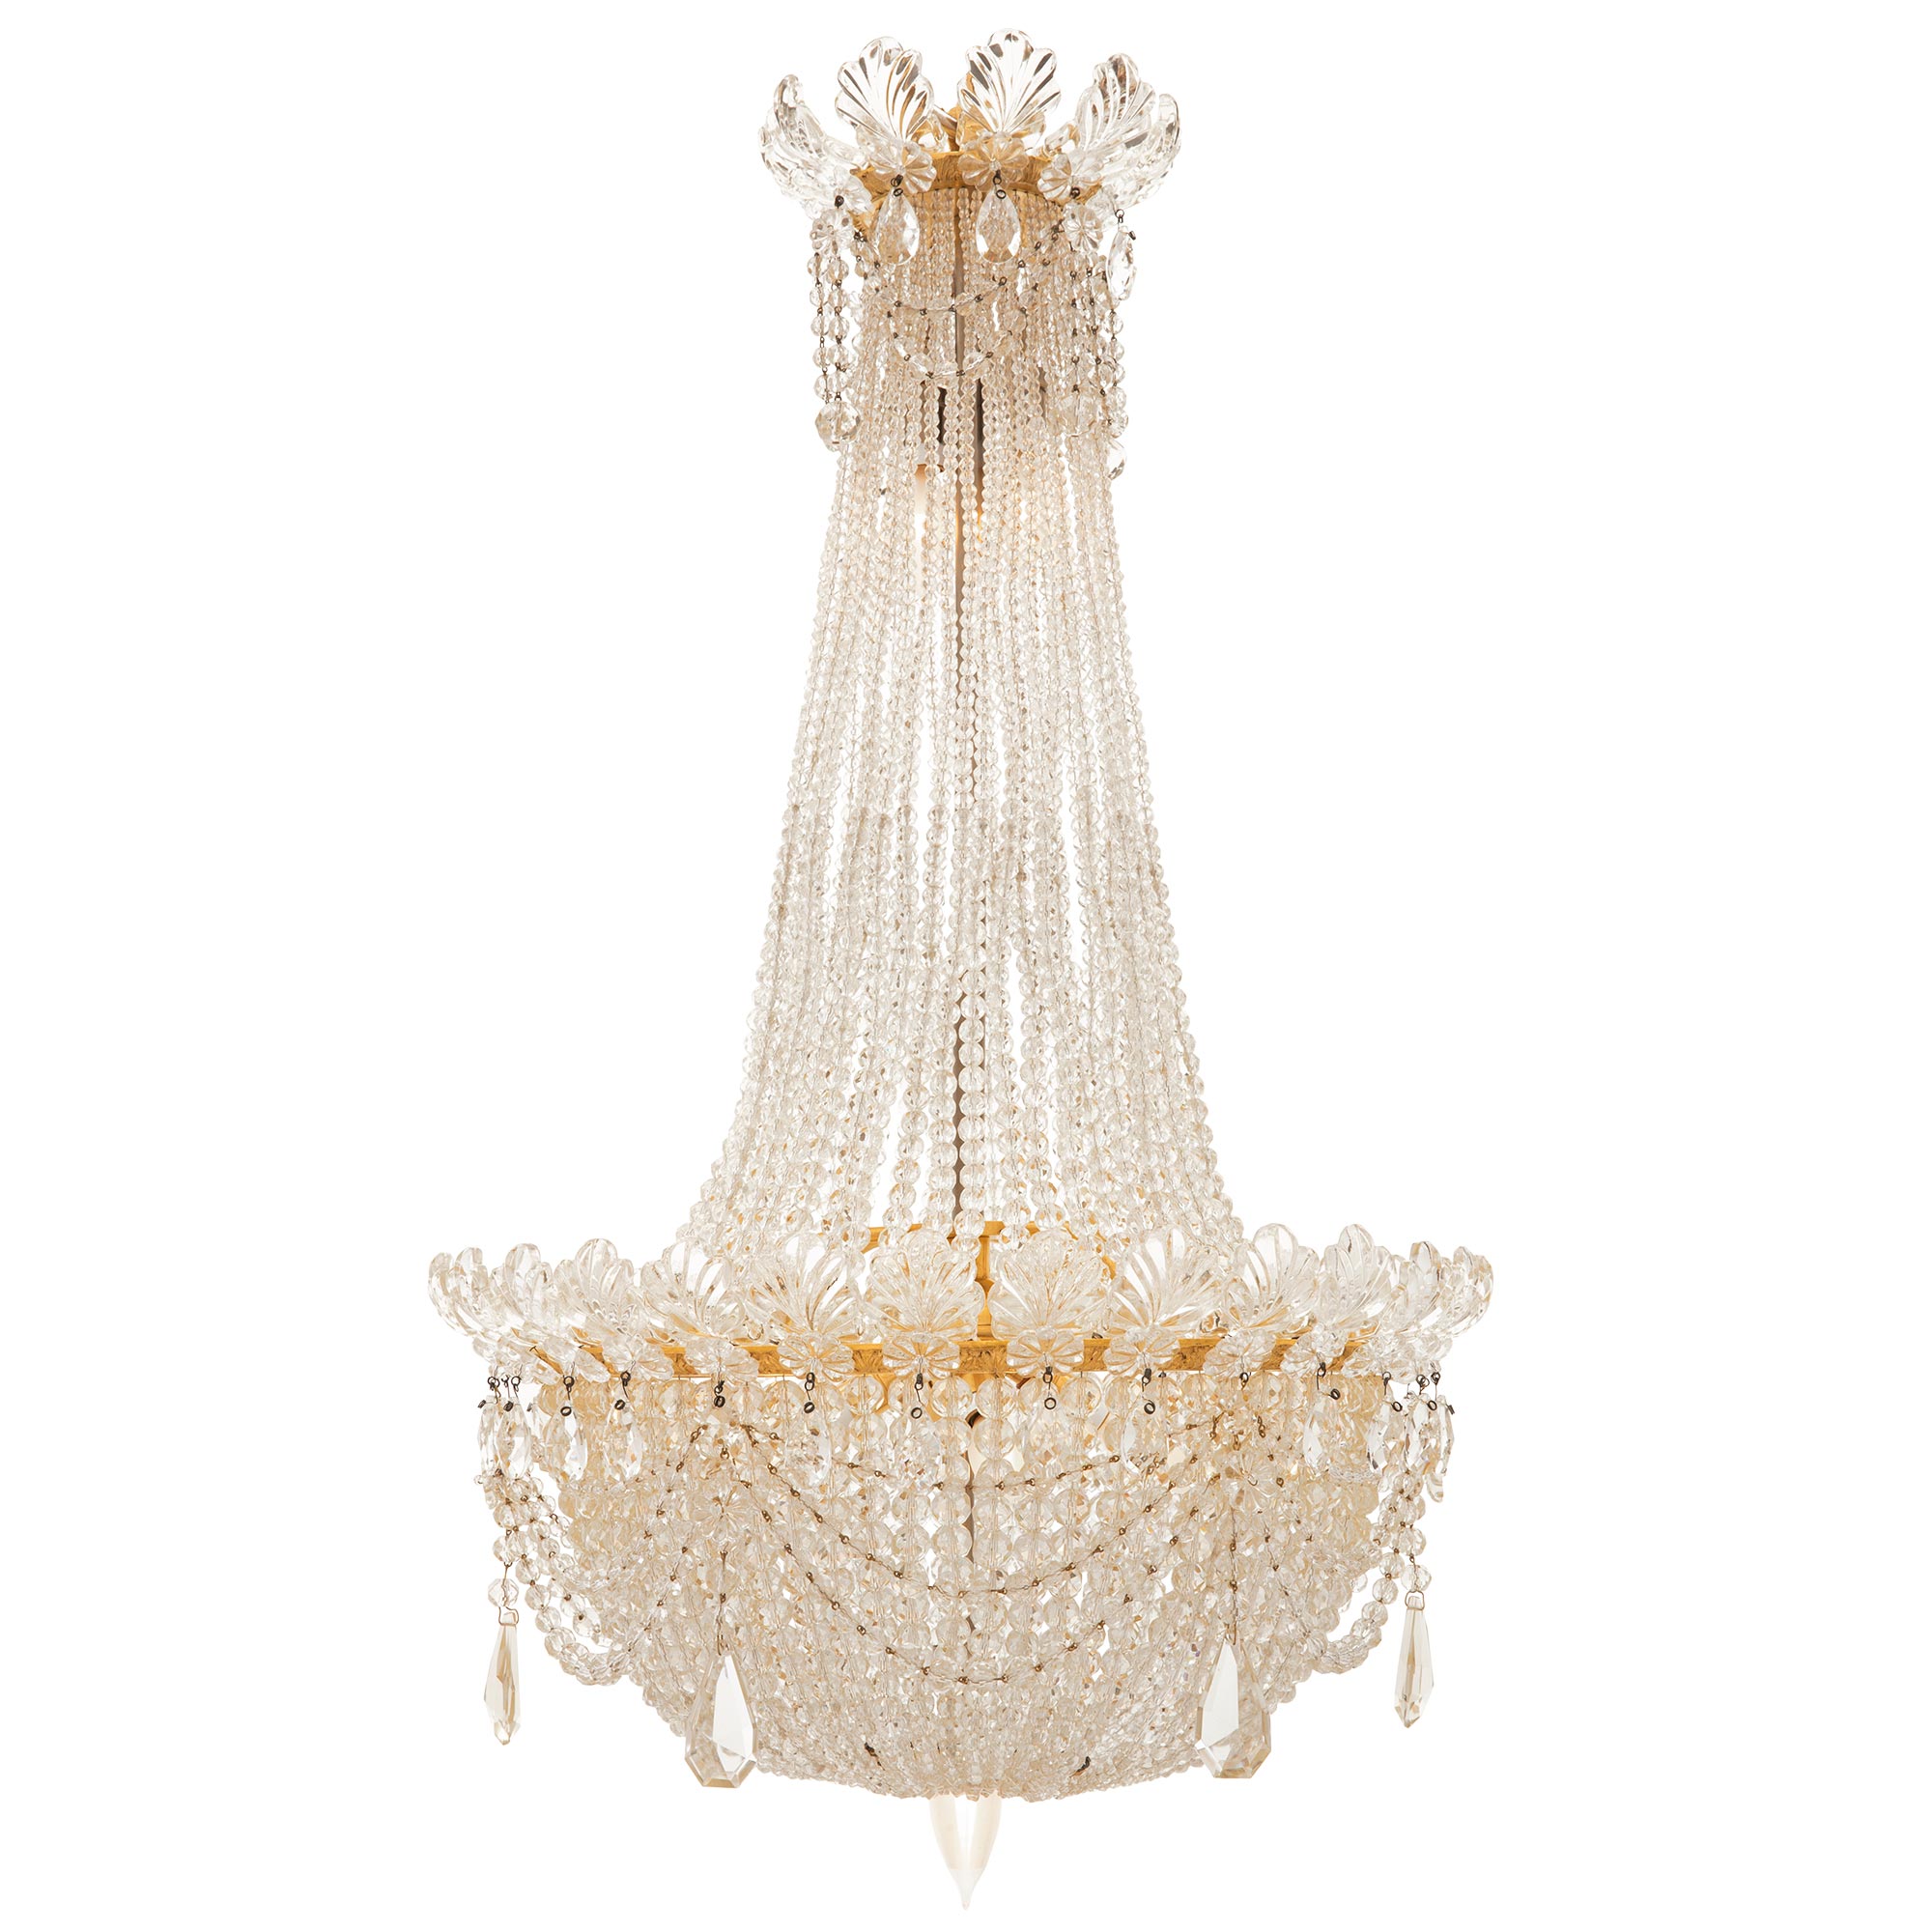 French 19th Century Belle Époque Period Baccarat Crystal and Ormolu Chandelier